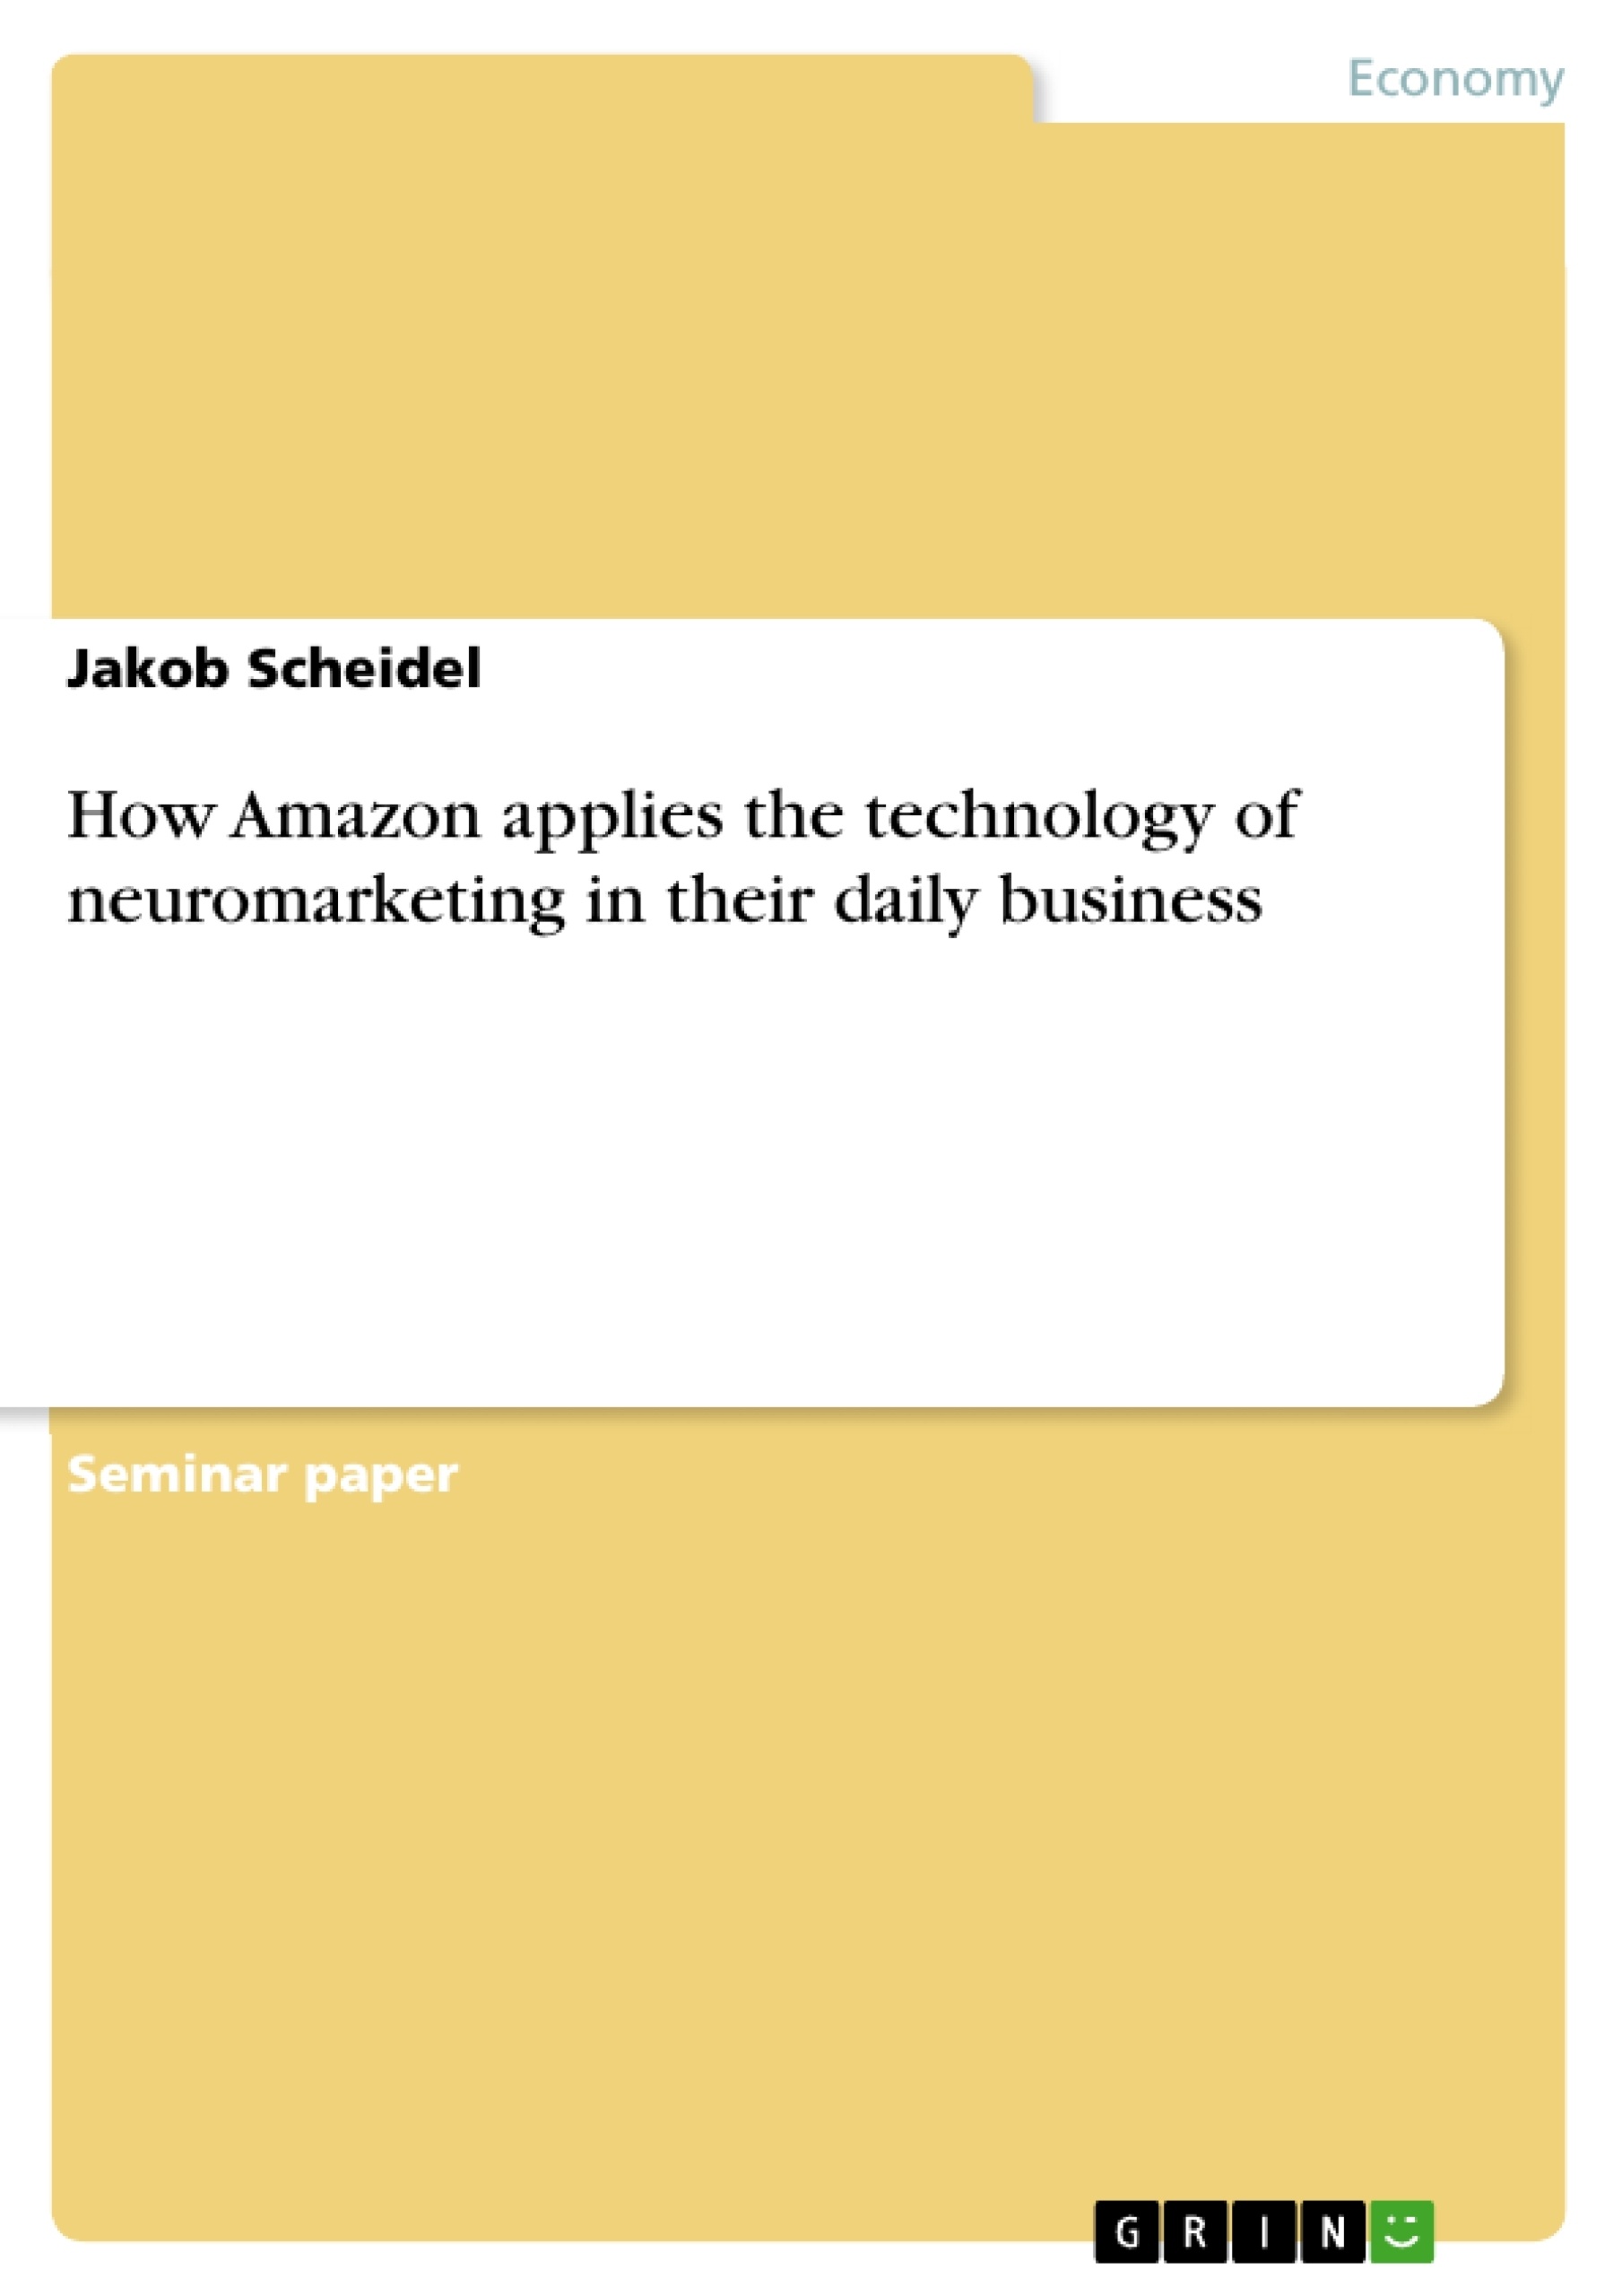 Title: How Amazon applies the technology of neuromarketing in their daily business